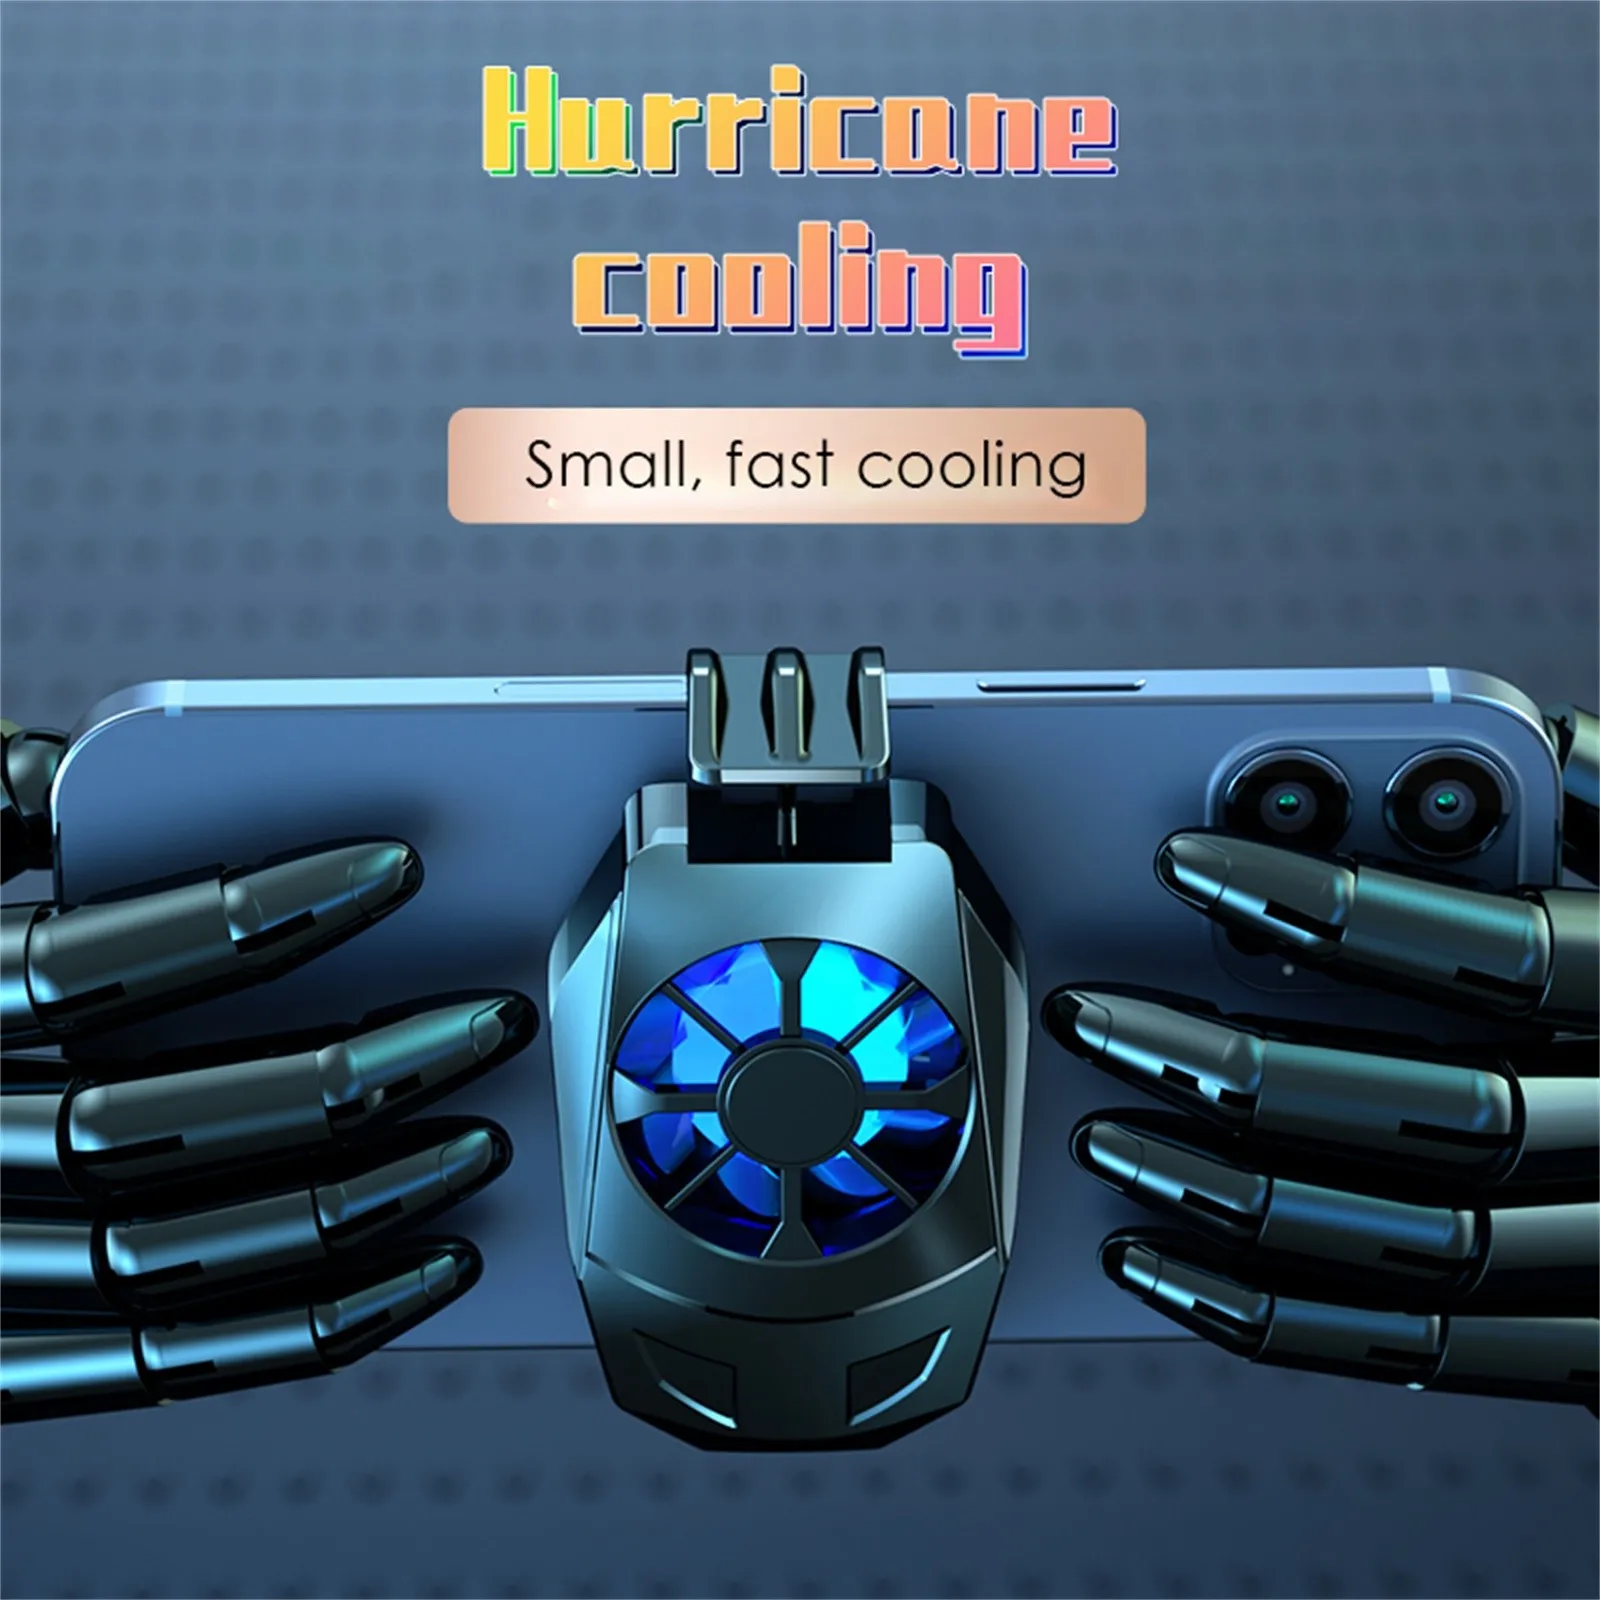 Hurricone cooling - smart cell direct